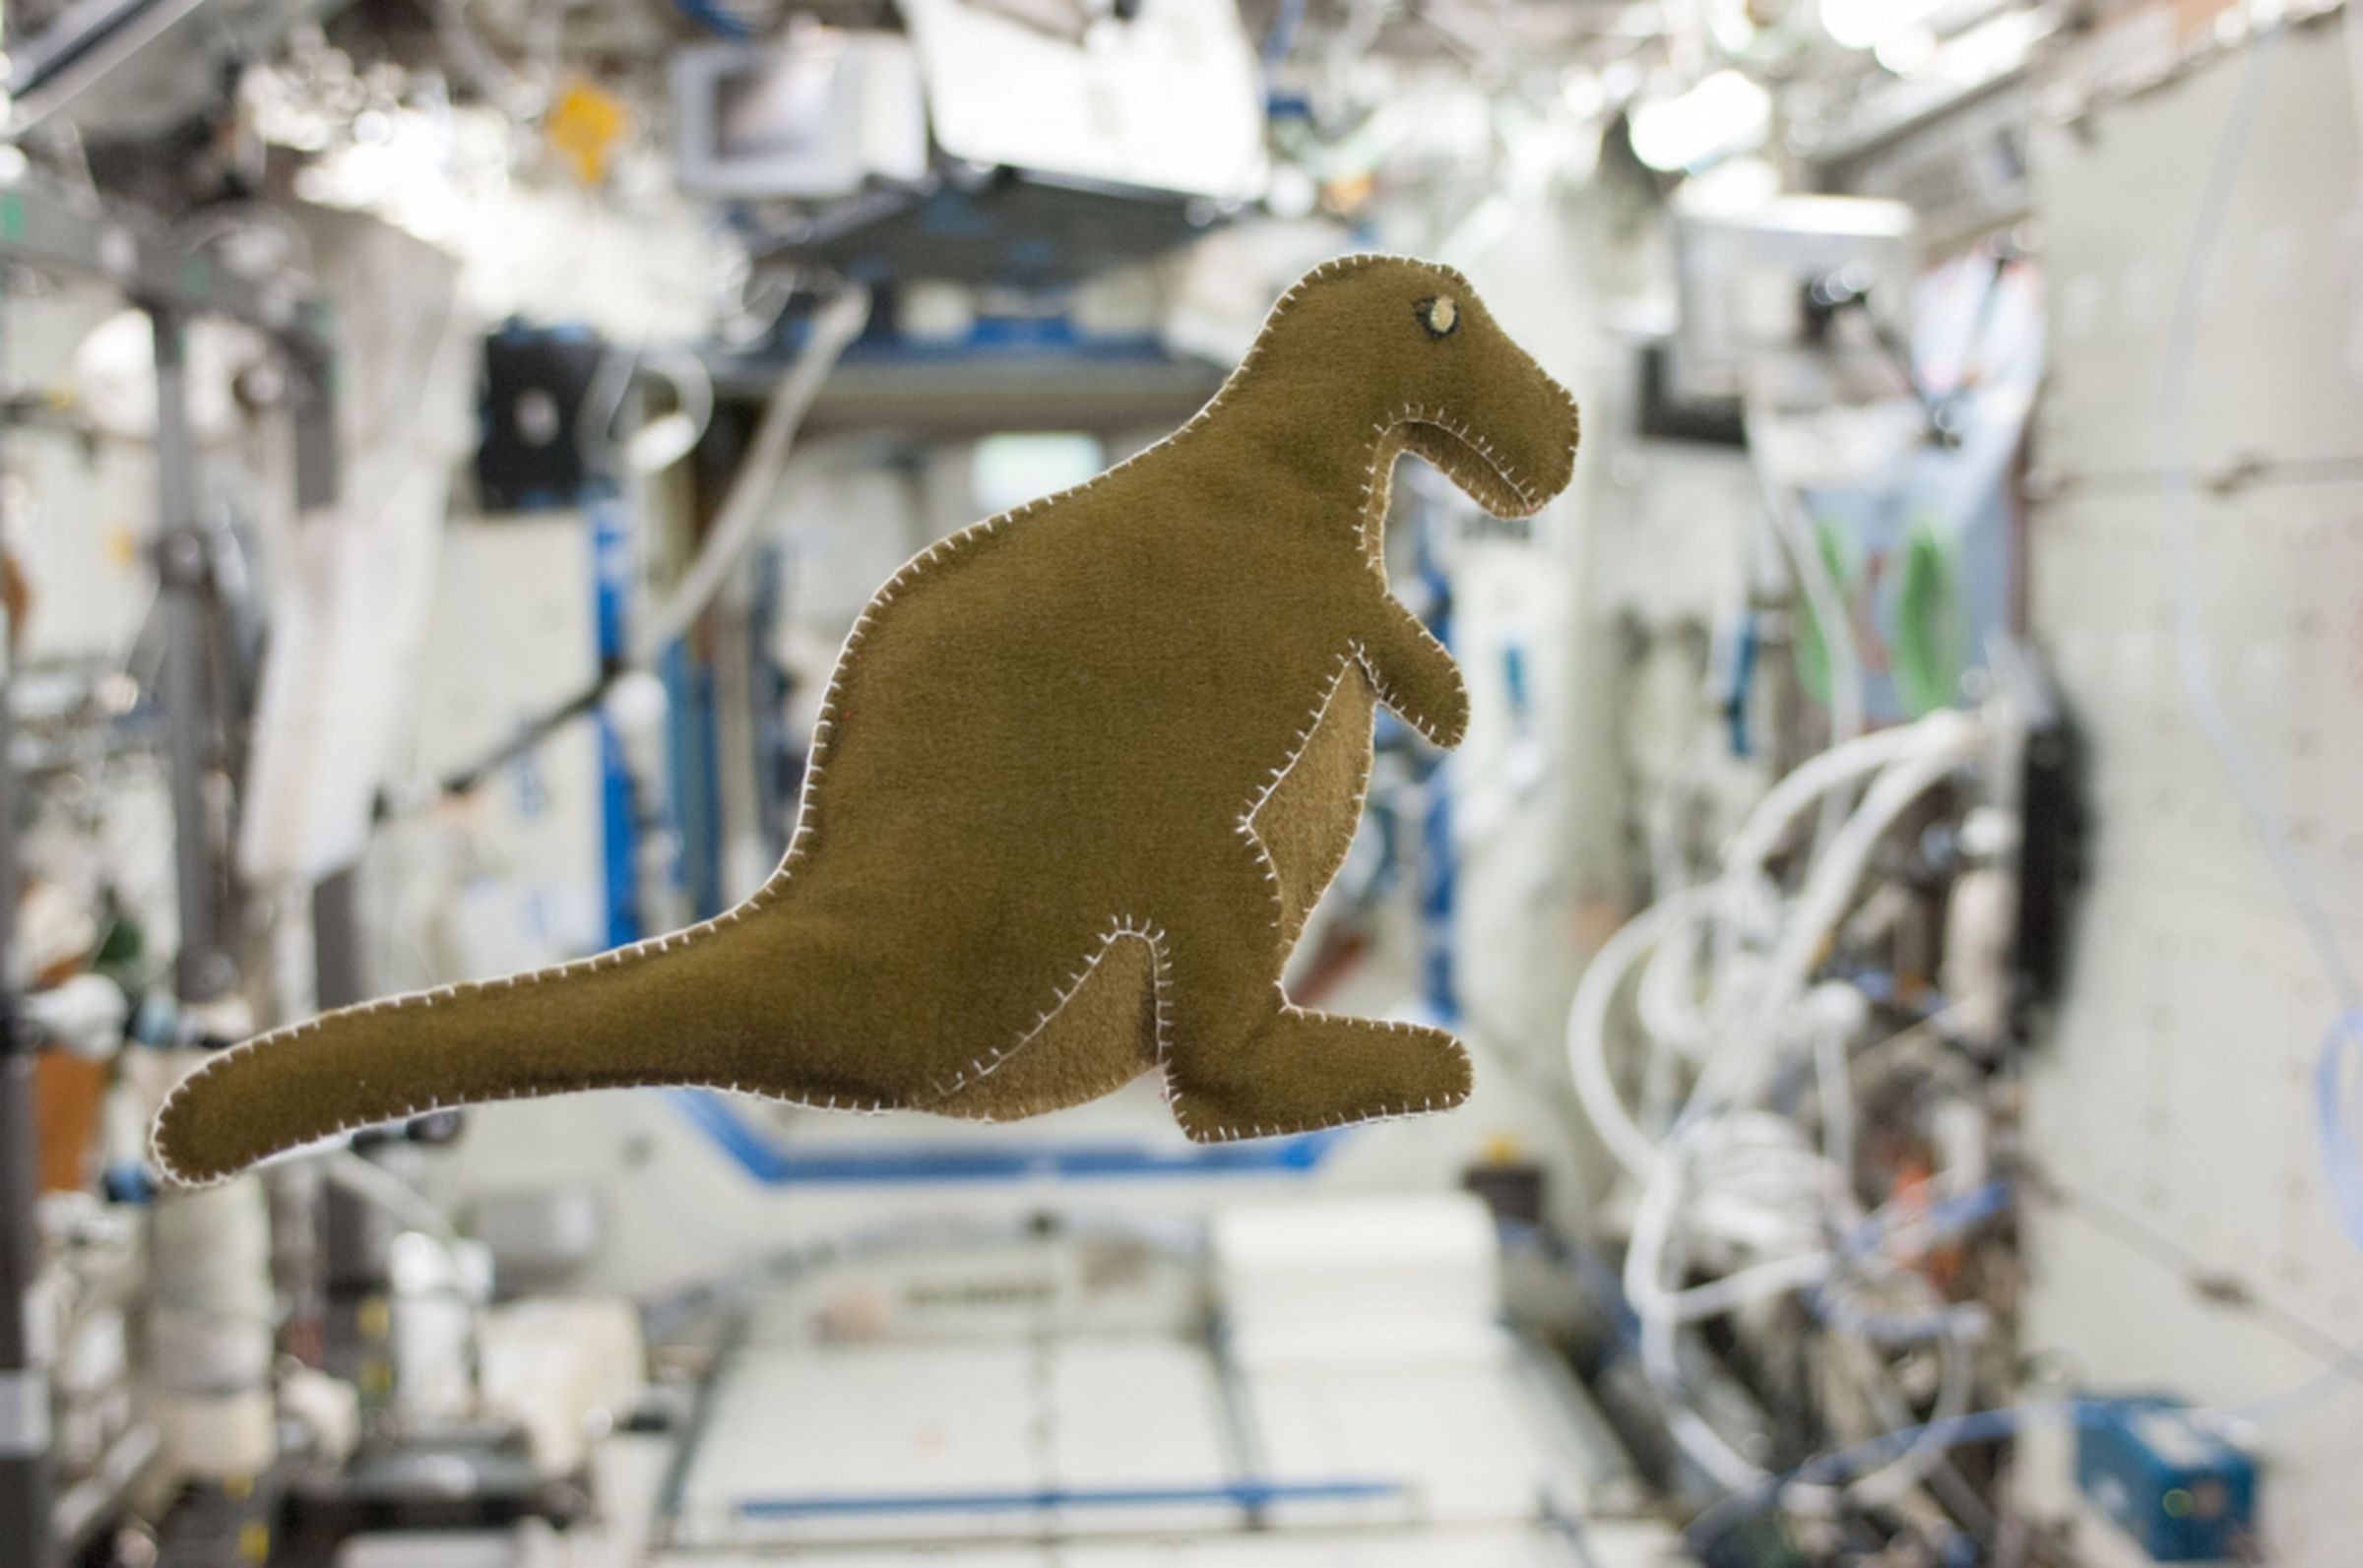 The dinosaur created by astronaut Karen Nyberg on the ISS.